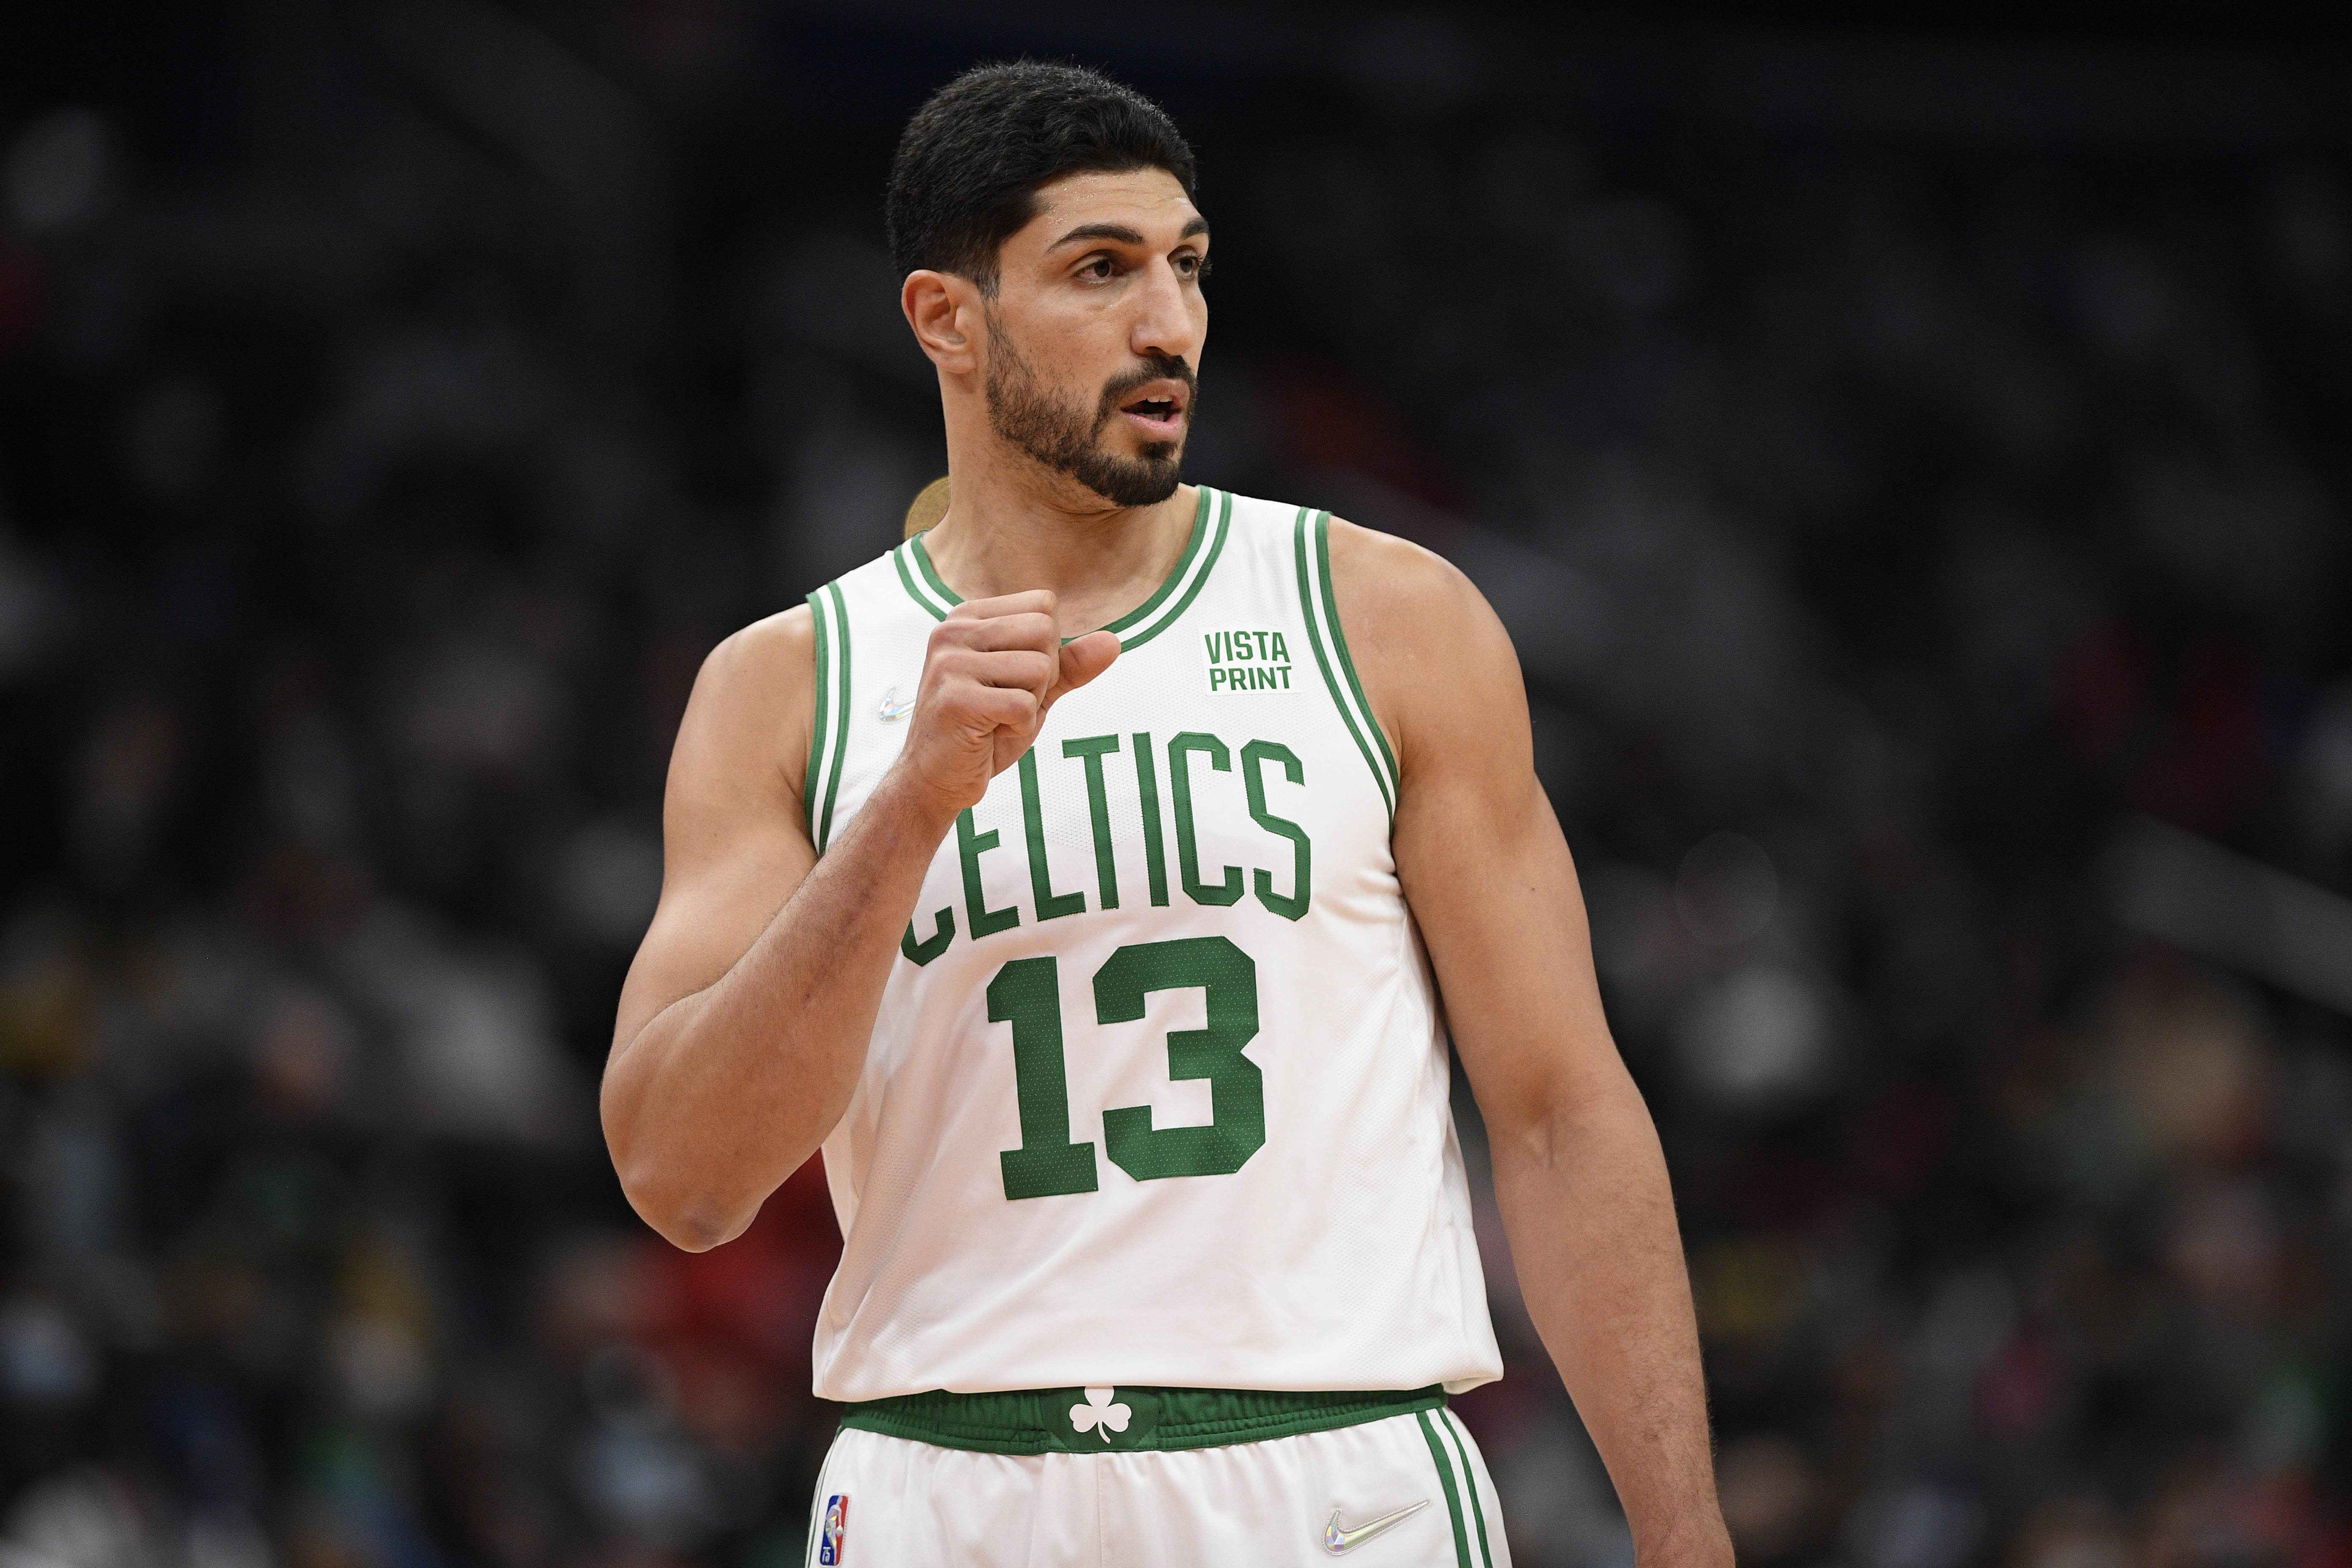 Celtics' Enes Kanter changing last name to Freedom upon becoming